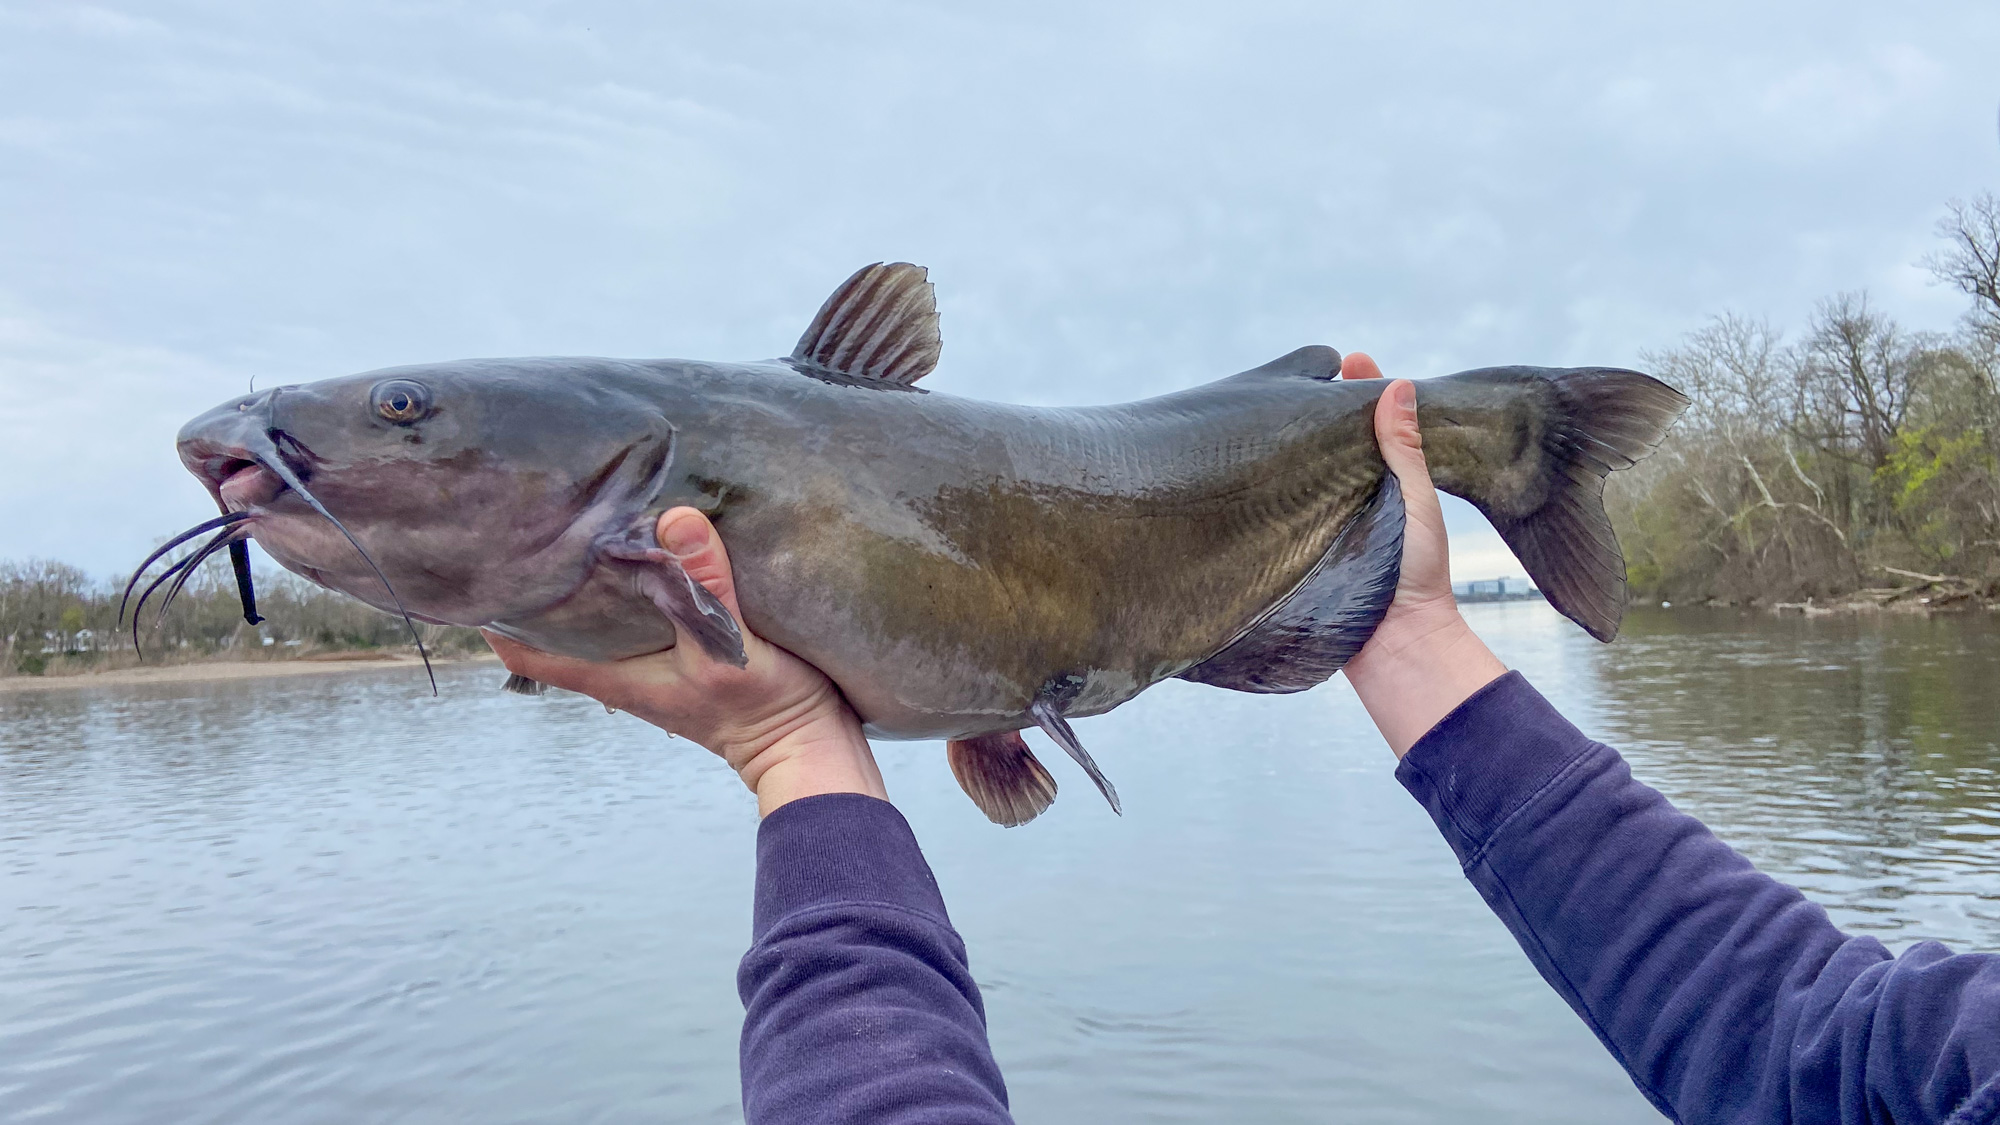 Catfish have spiny fins that can stab fishermen.